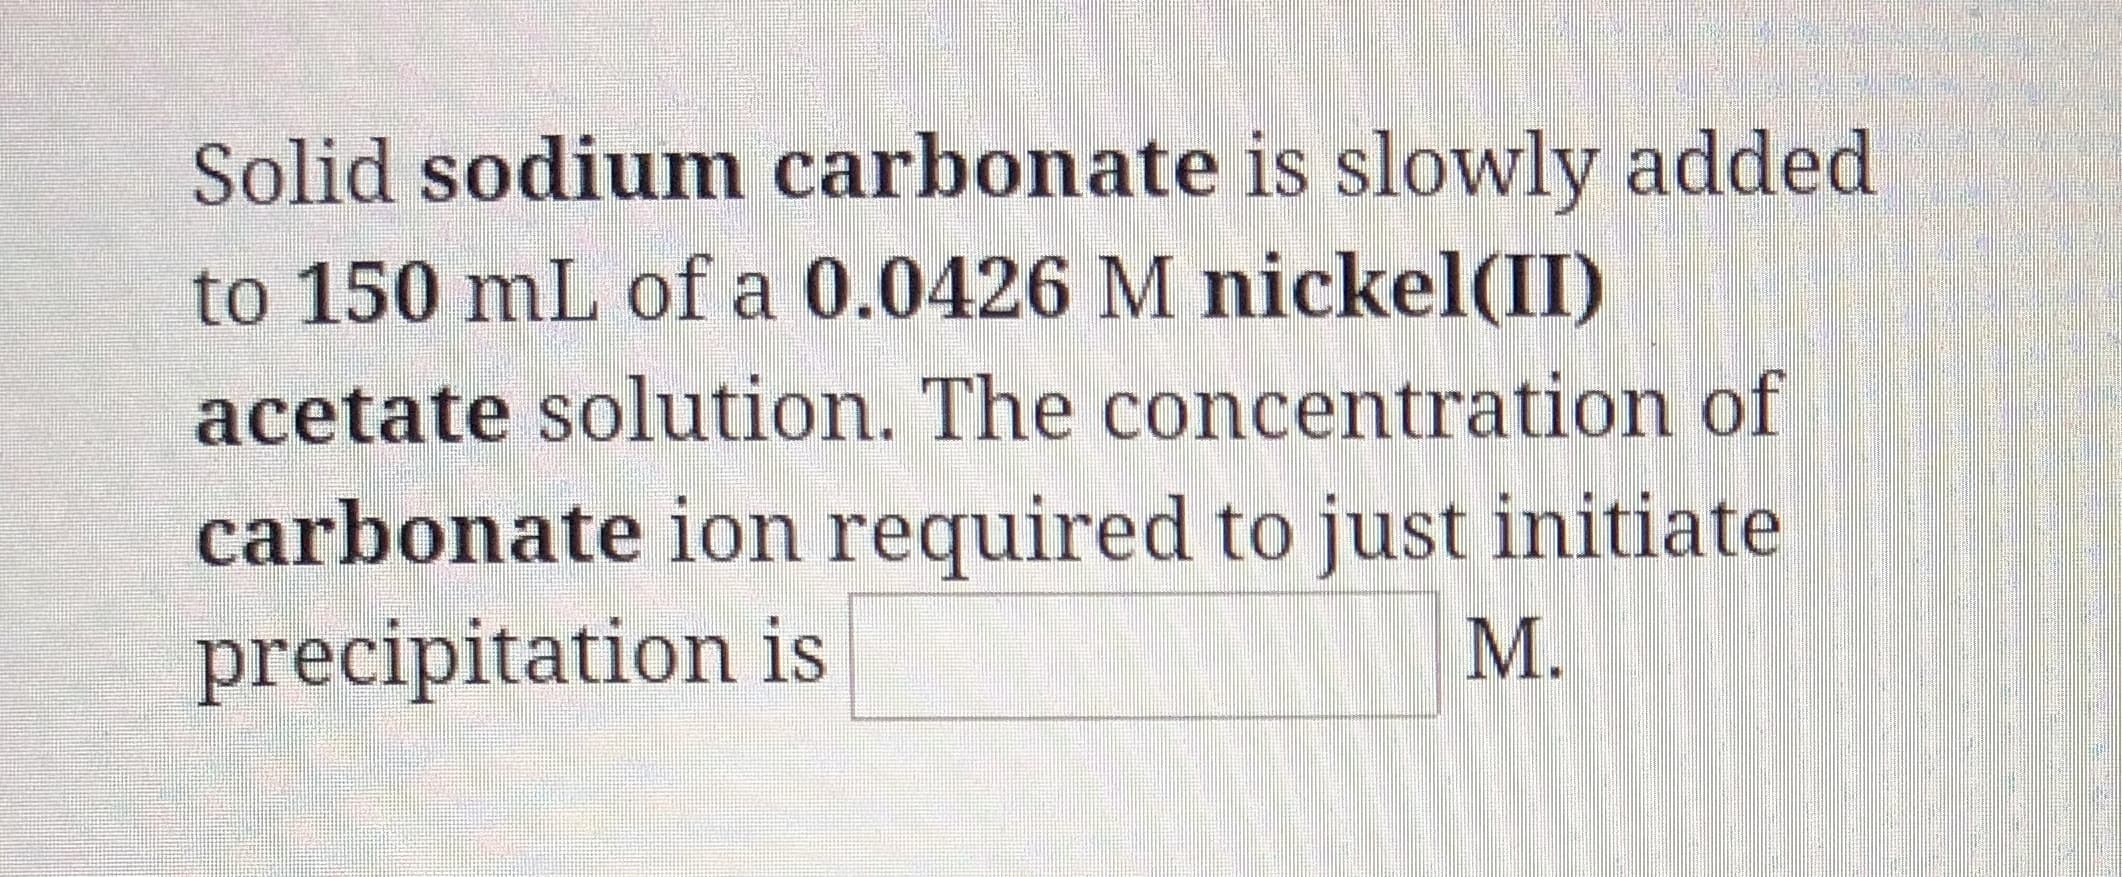 Solid sodium carbonate is slowly added
to 150 mL of a 0.0426 M nickel(II)
acetate solution. The concentration of
carbonate ion required to just initiate
precipitation is
М.
